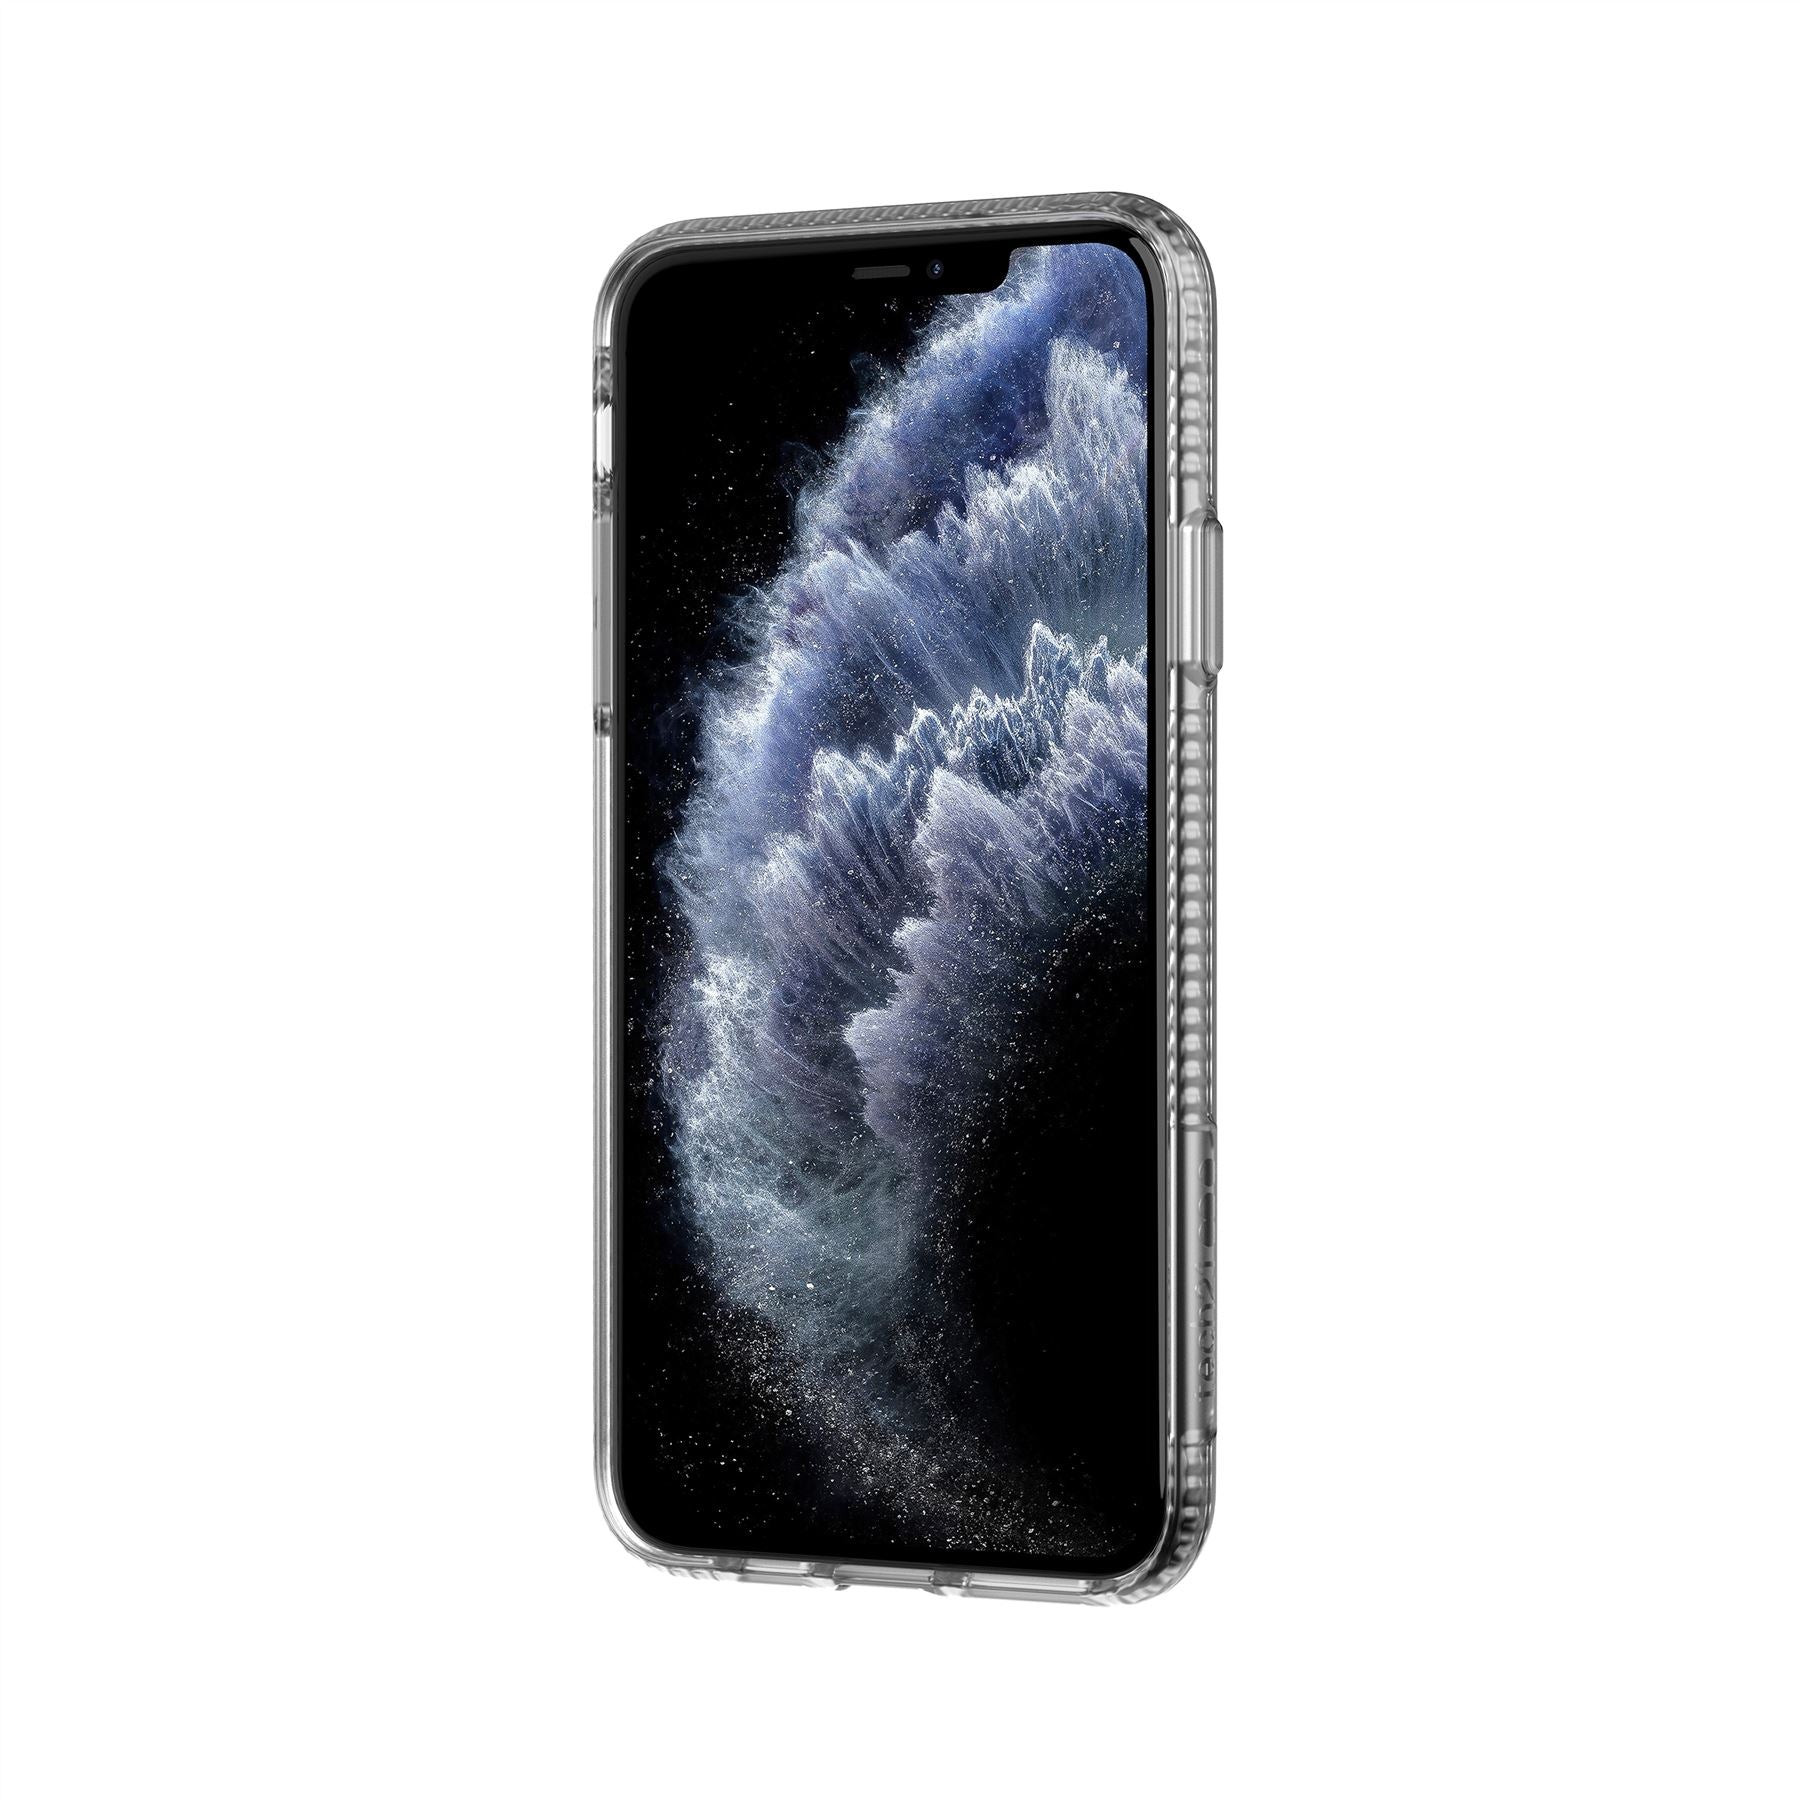 CRYSTAL-X for iPhone 11/Pro/Max, Scratch-resistant